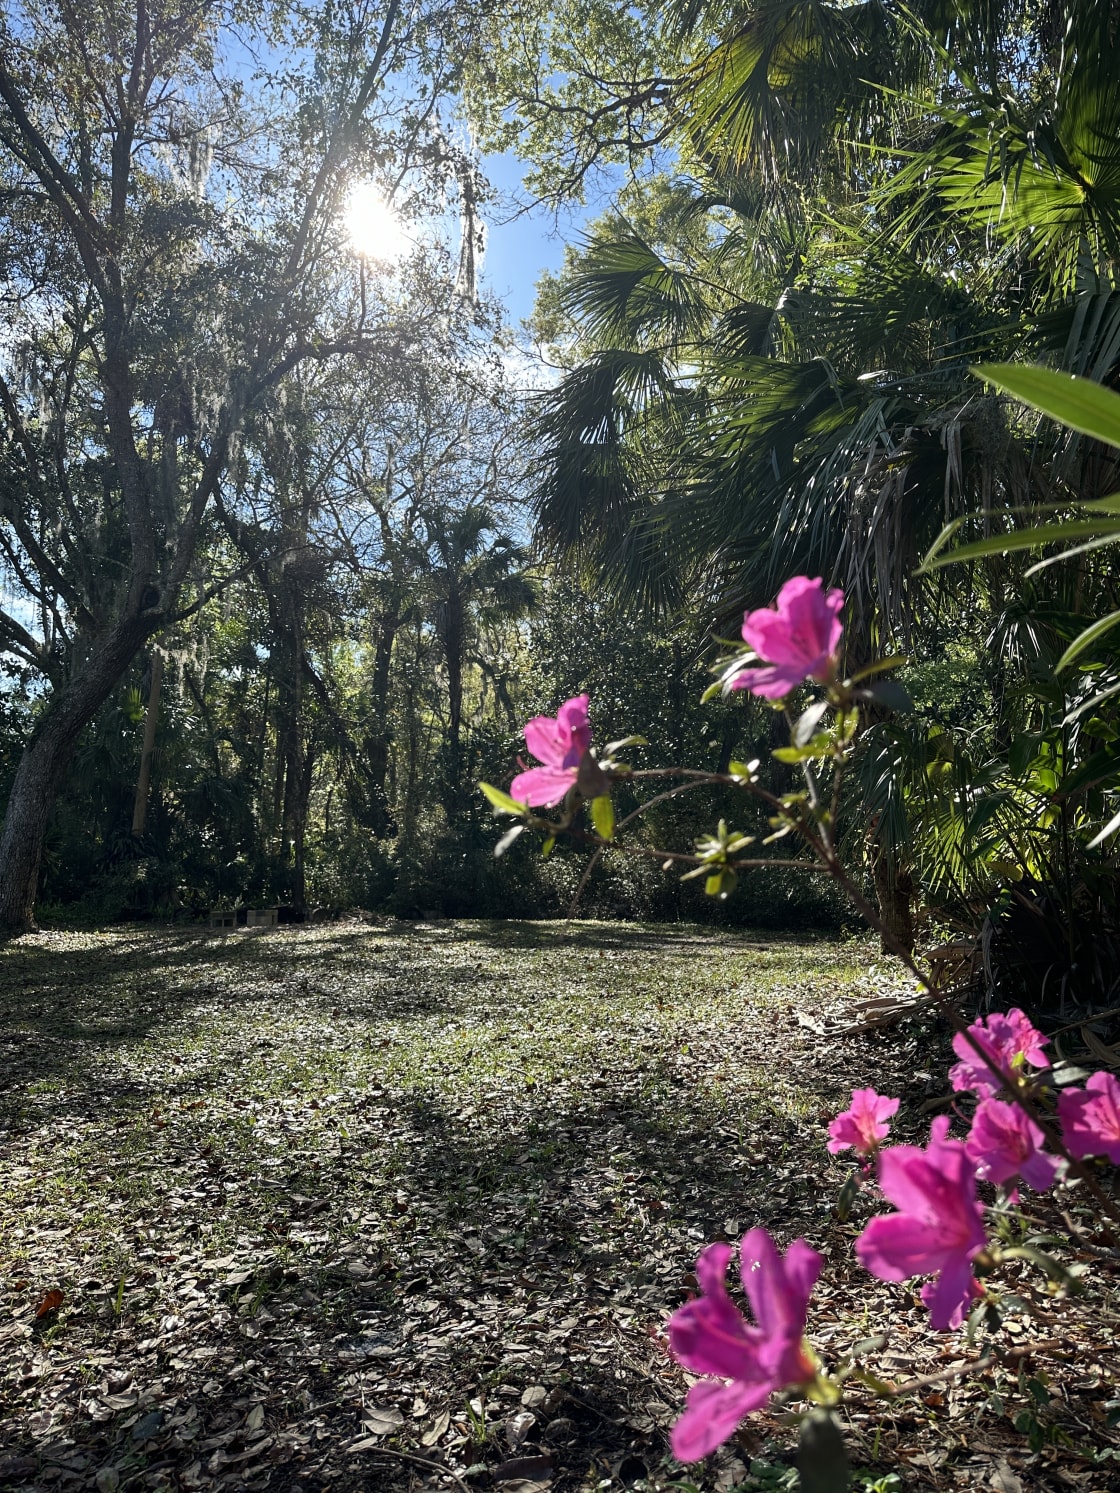 Flat grassy area past the asphalt driveway. Space is about 40 ft by 60 ft and surrounded by natural Florida. Blooming azaleas featured in the photo.